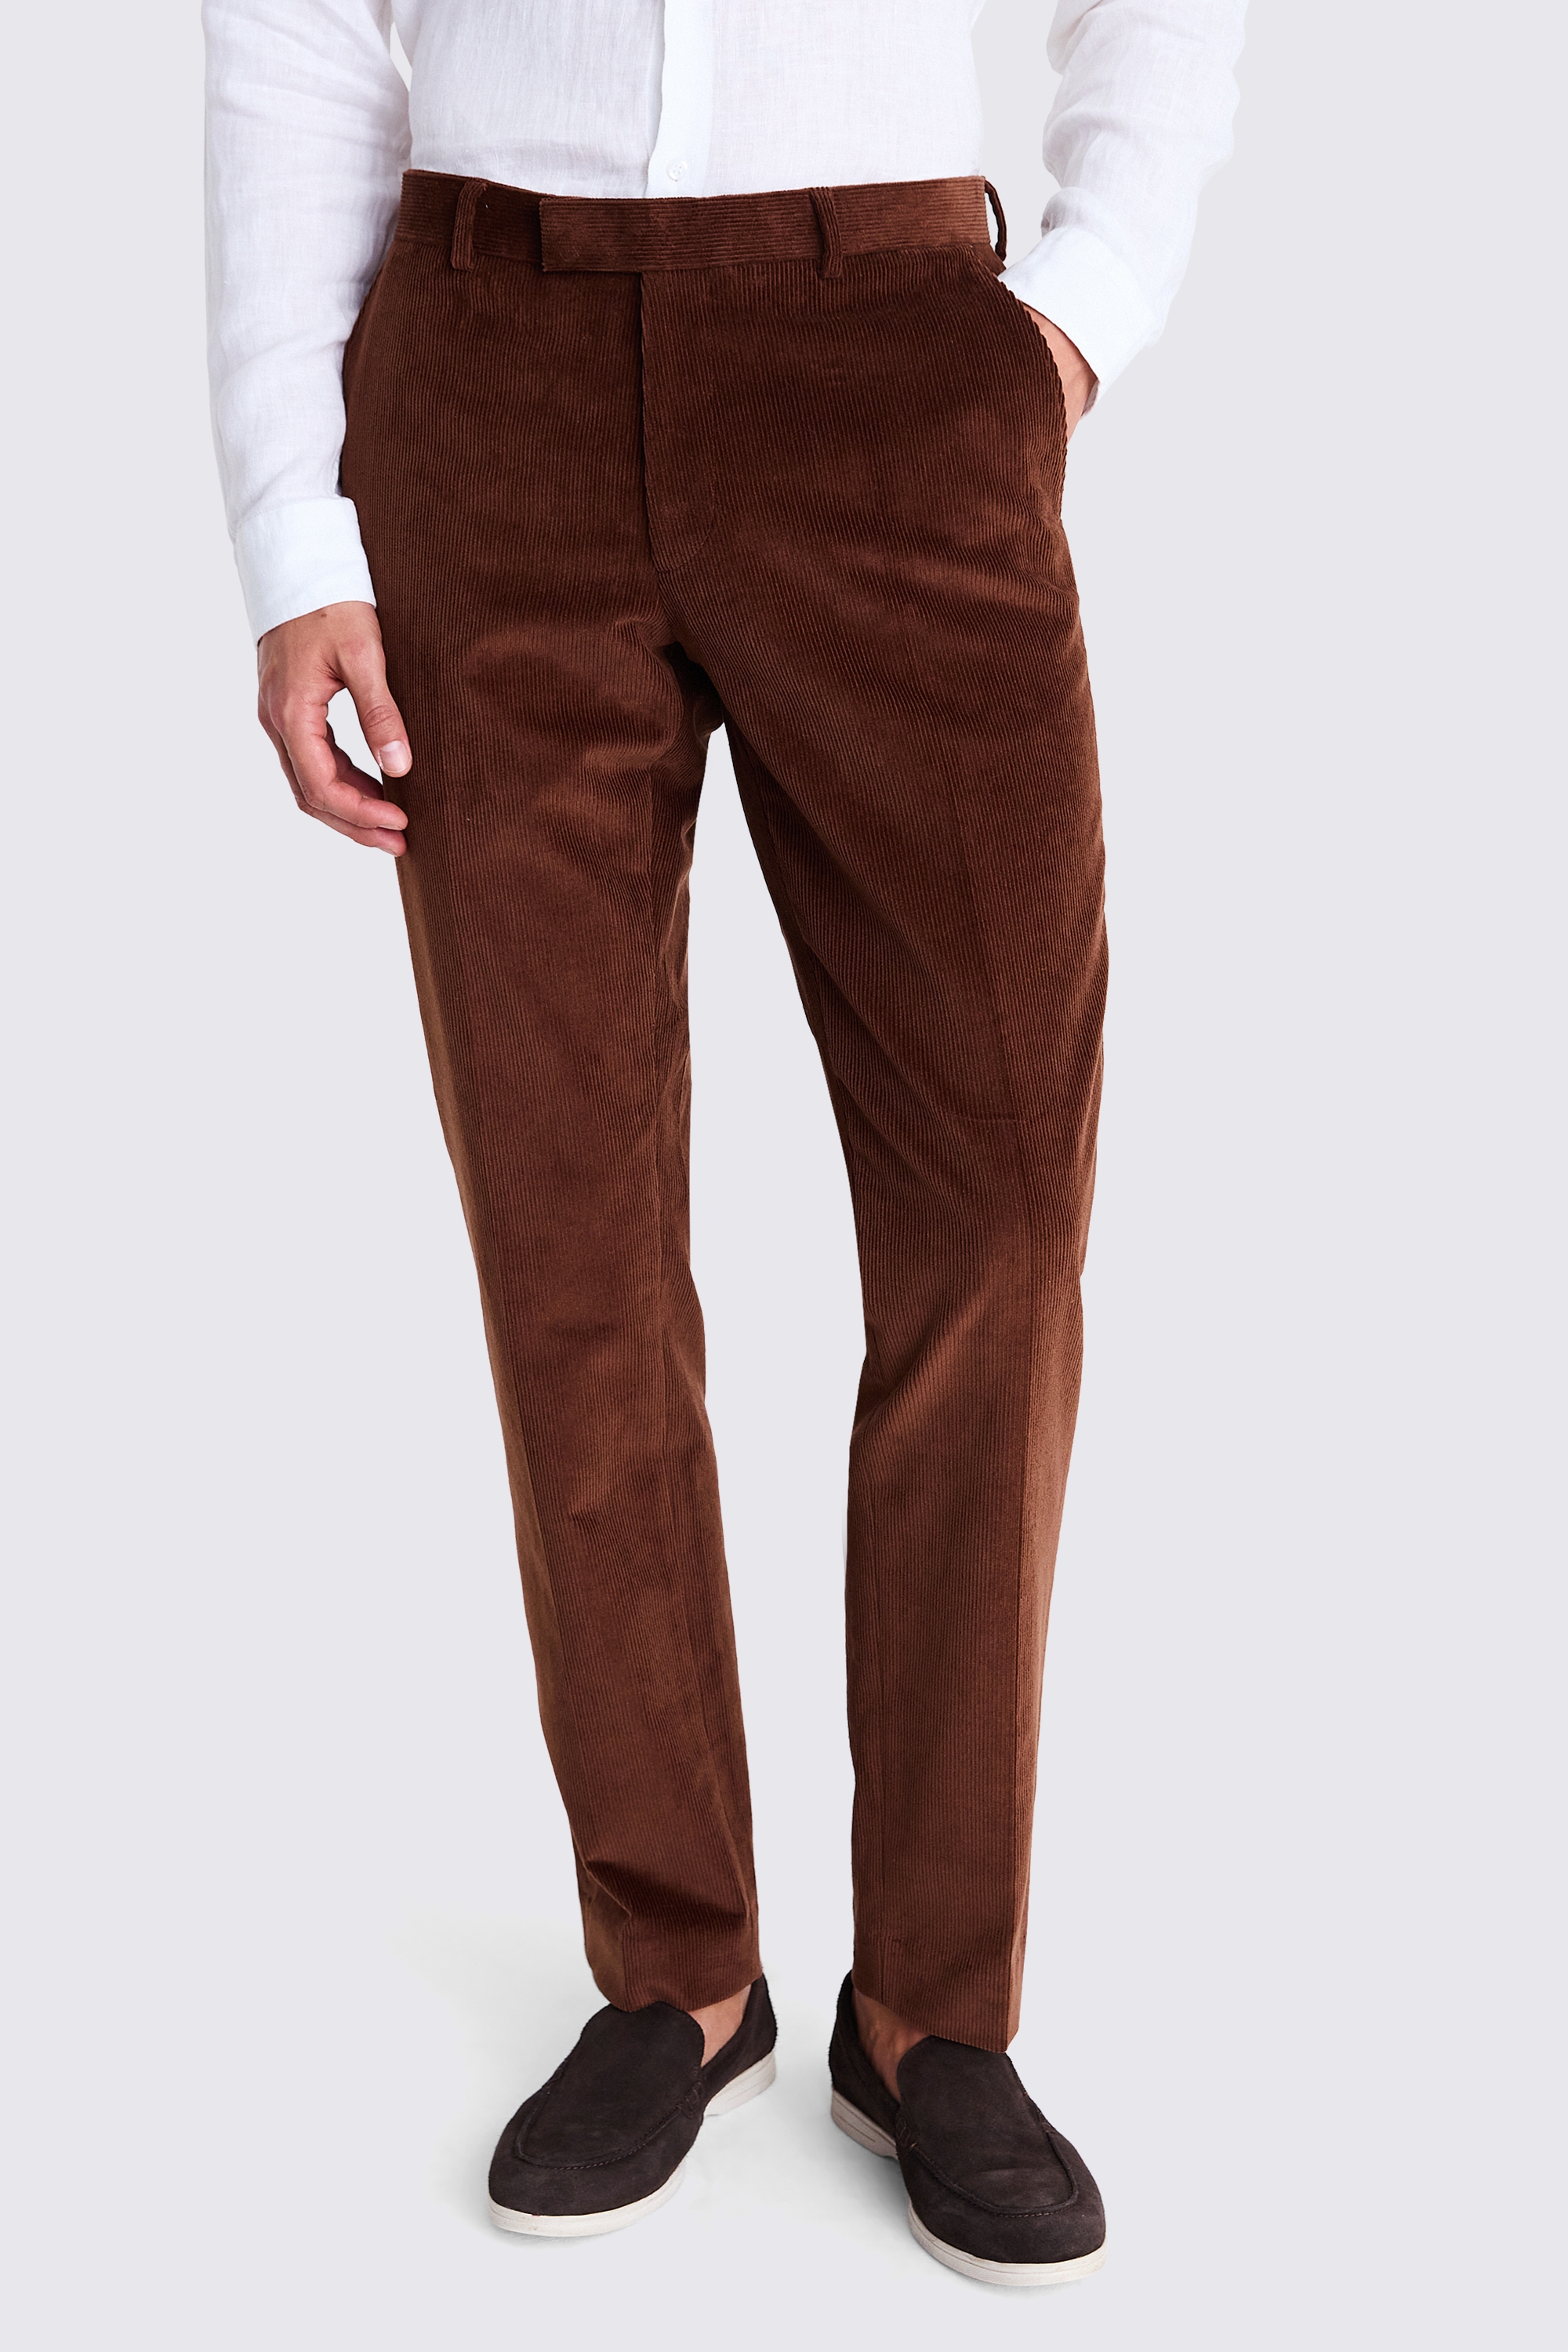 Slim Fit Copper Corduroy Trousers | Buy Online at Moss